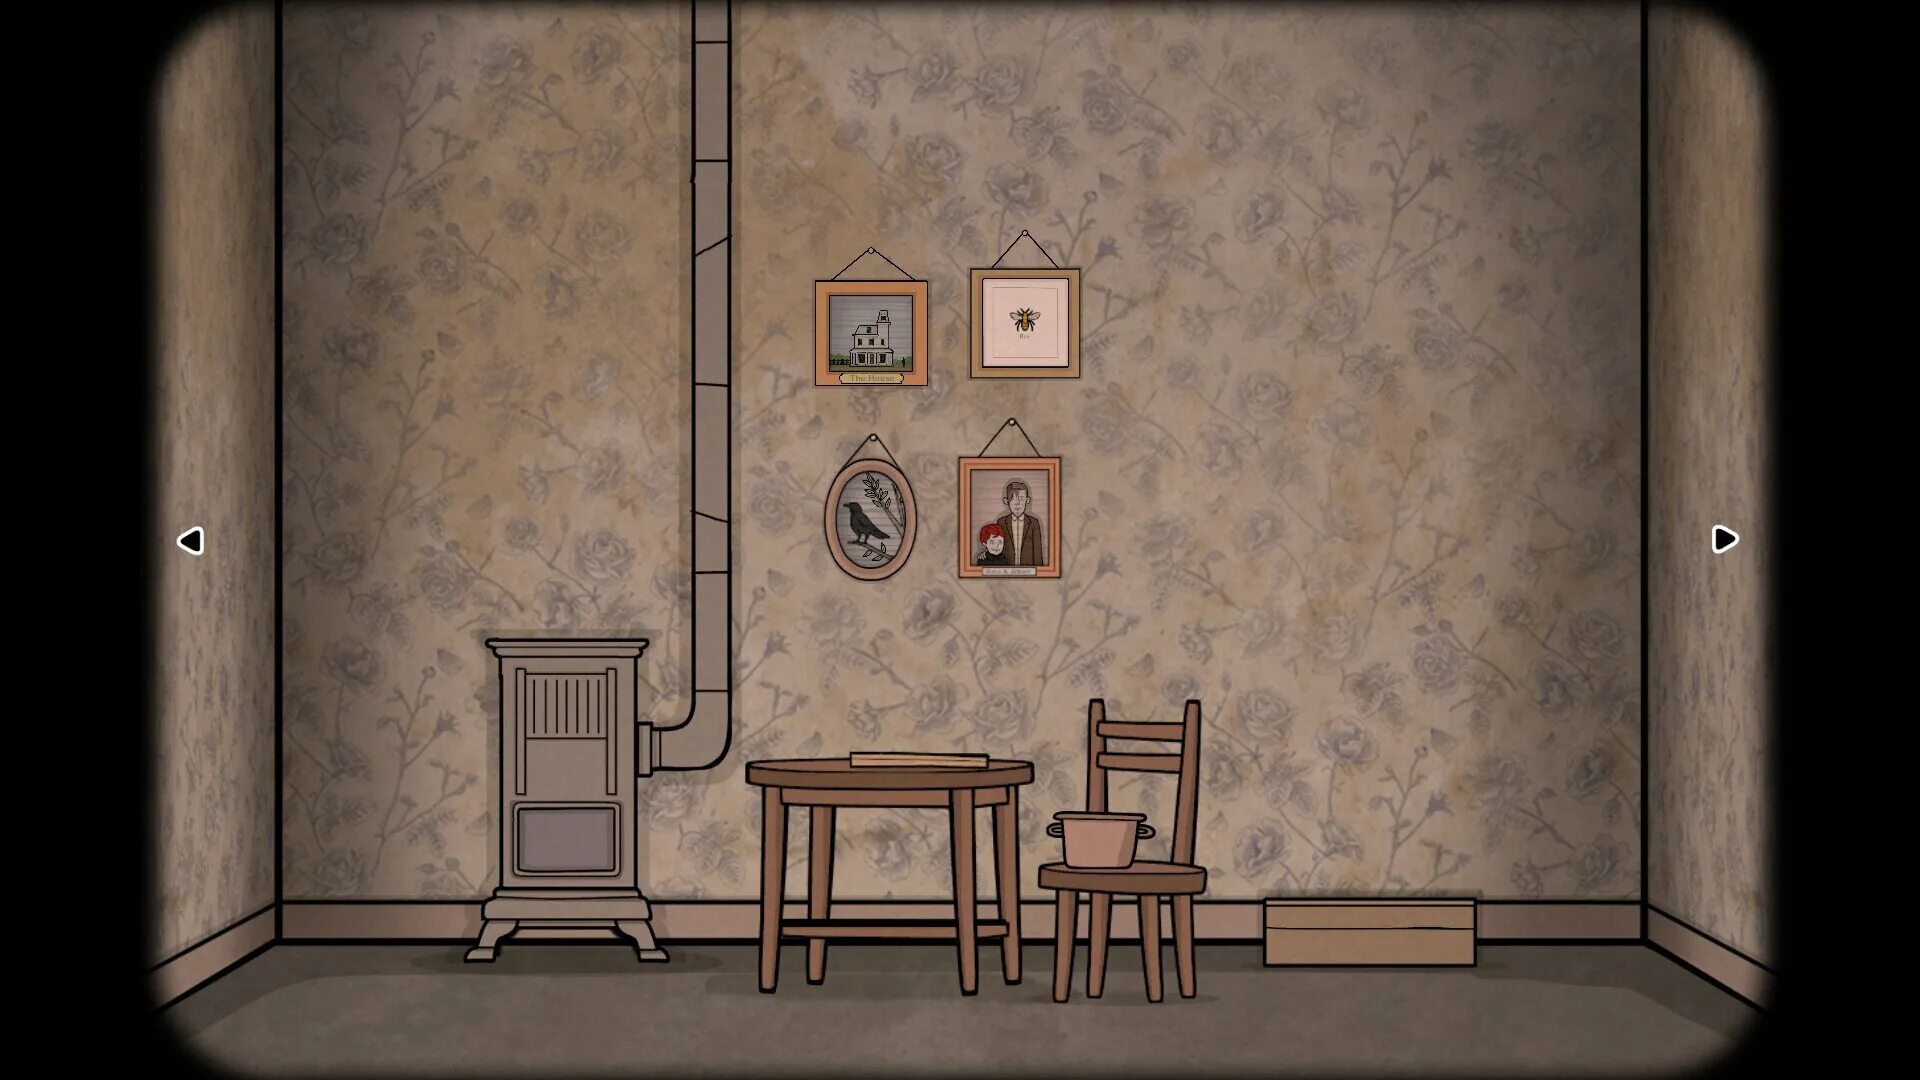 The past within Rusty Lake. Игра the past within. The past within |1| (Rusty Lake Coop). The past within 2. The past within rusty